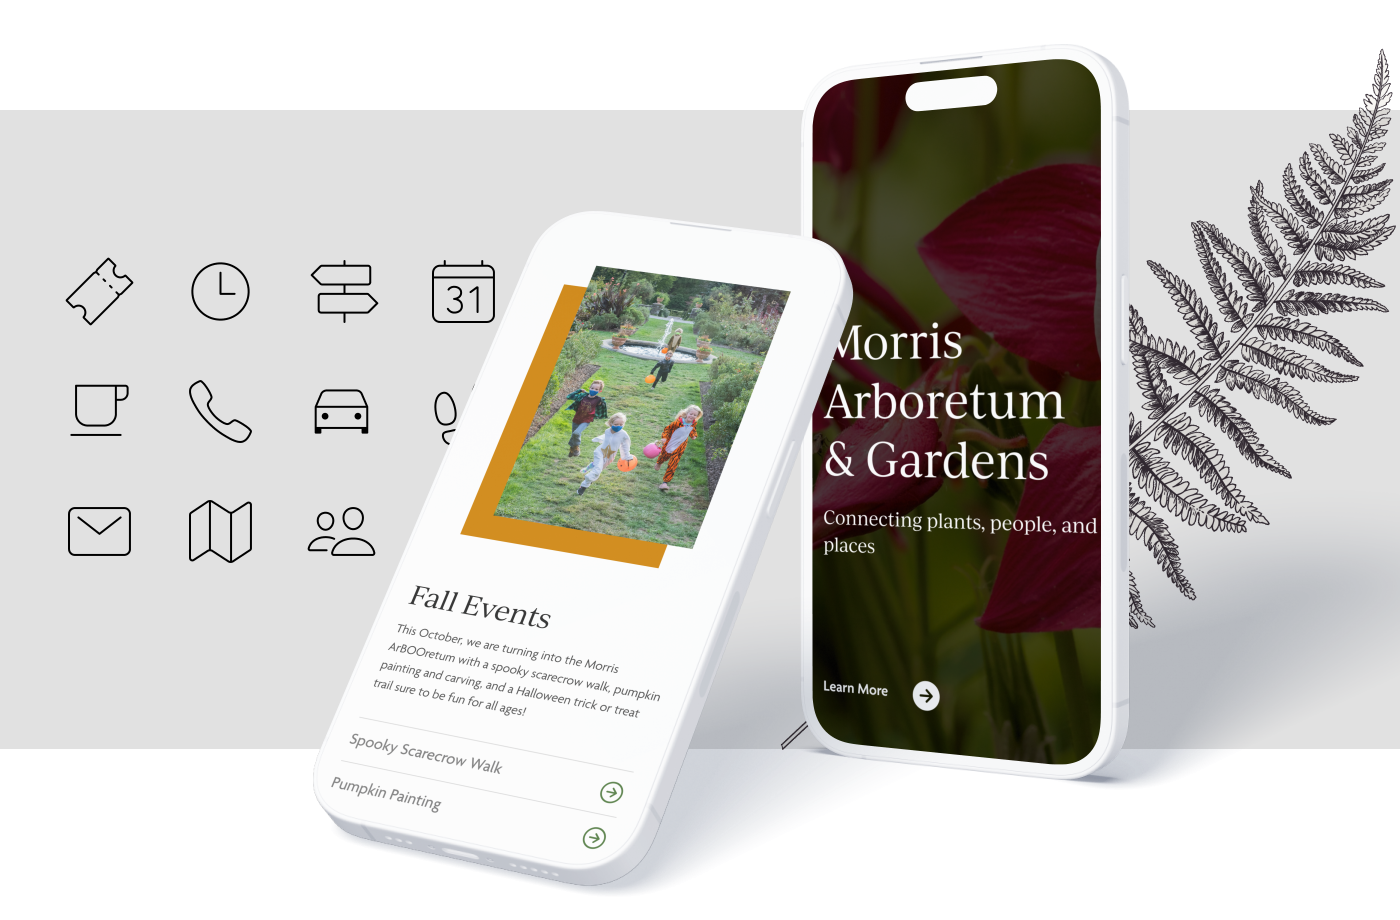 examples of the Morris Arboretum & Gardens website on two different mobile devices with various icons and leaf illustrations behind them